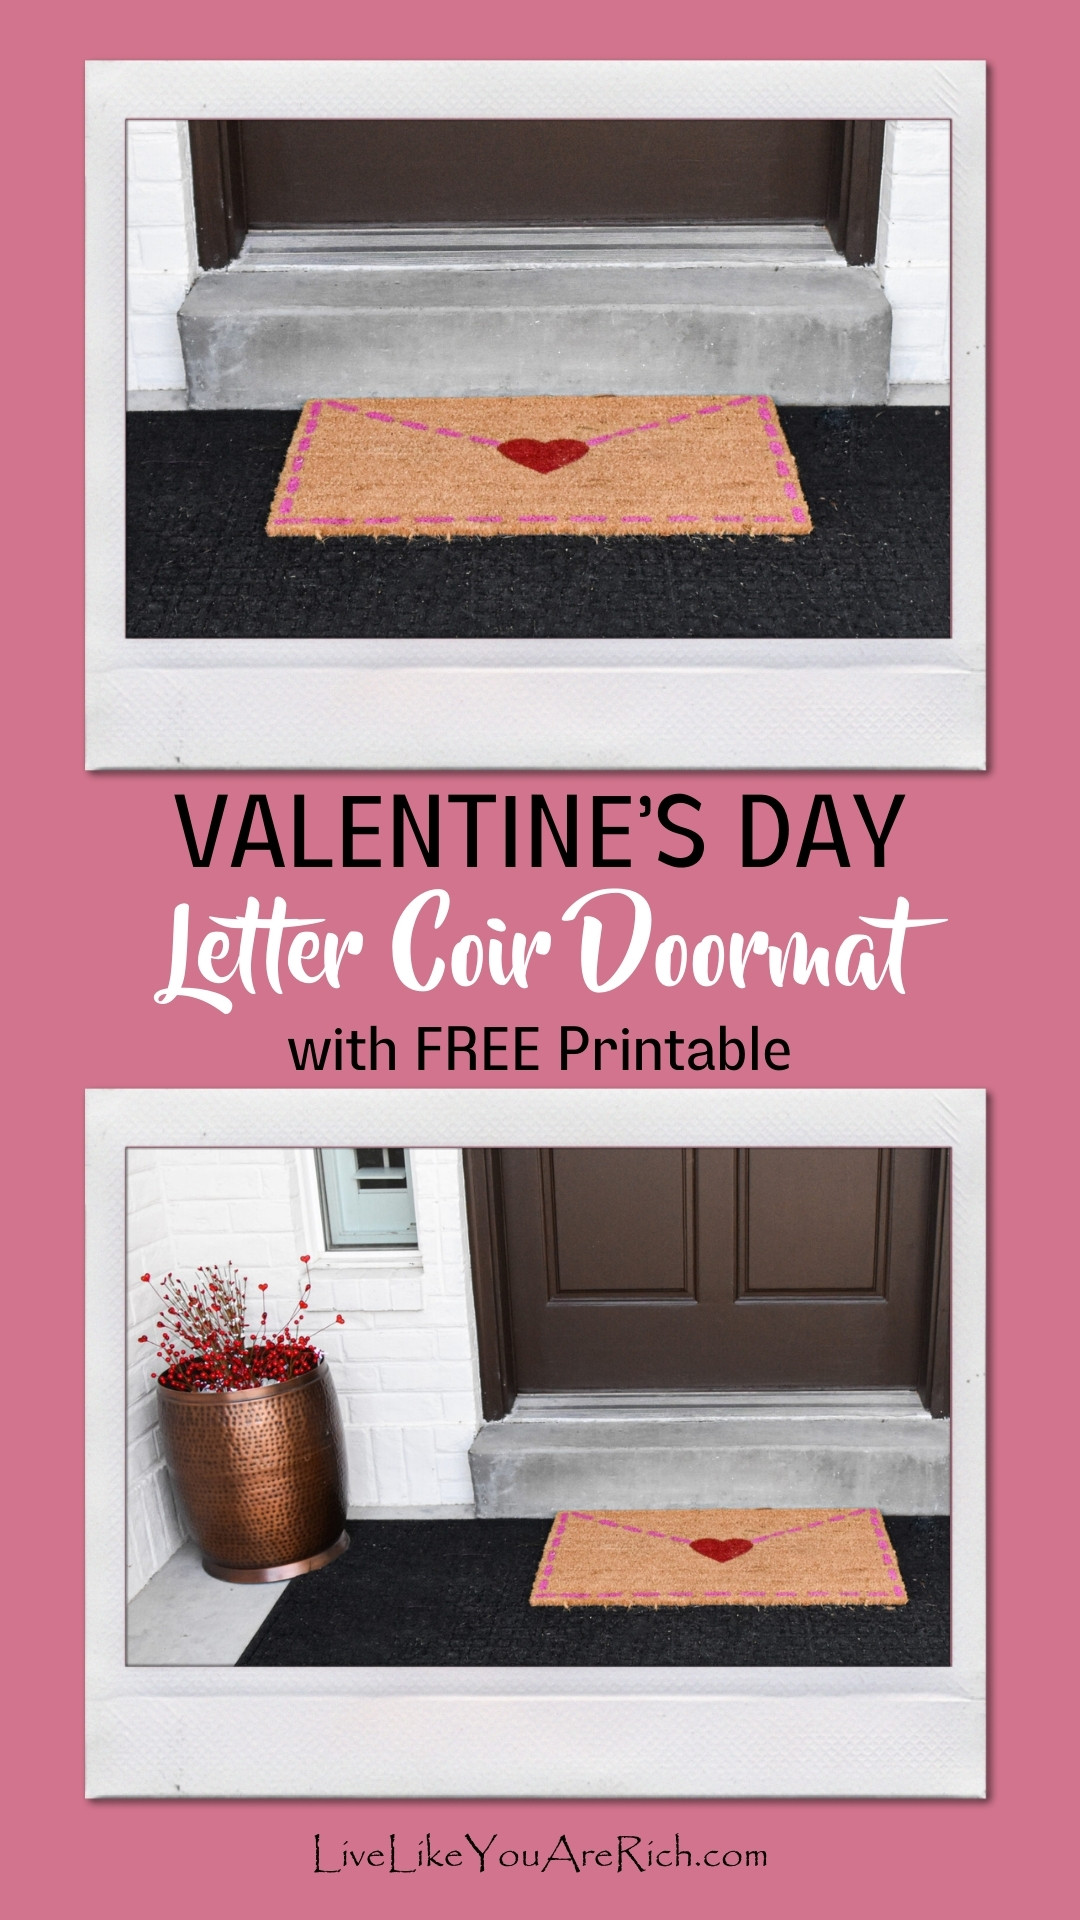 This Valentine’s Day Letter Coir Doormat was a simple doormat I made and it only cost me $12.00 out of pocket for the supplies. I’ve made many coir doormats and this one was by far the easiest because I did not use a Cricut, stencil or cutting board; I simply free-hand painted the design. Download the FREE printable.